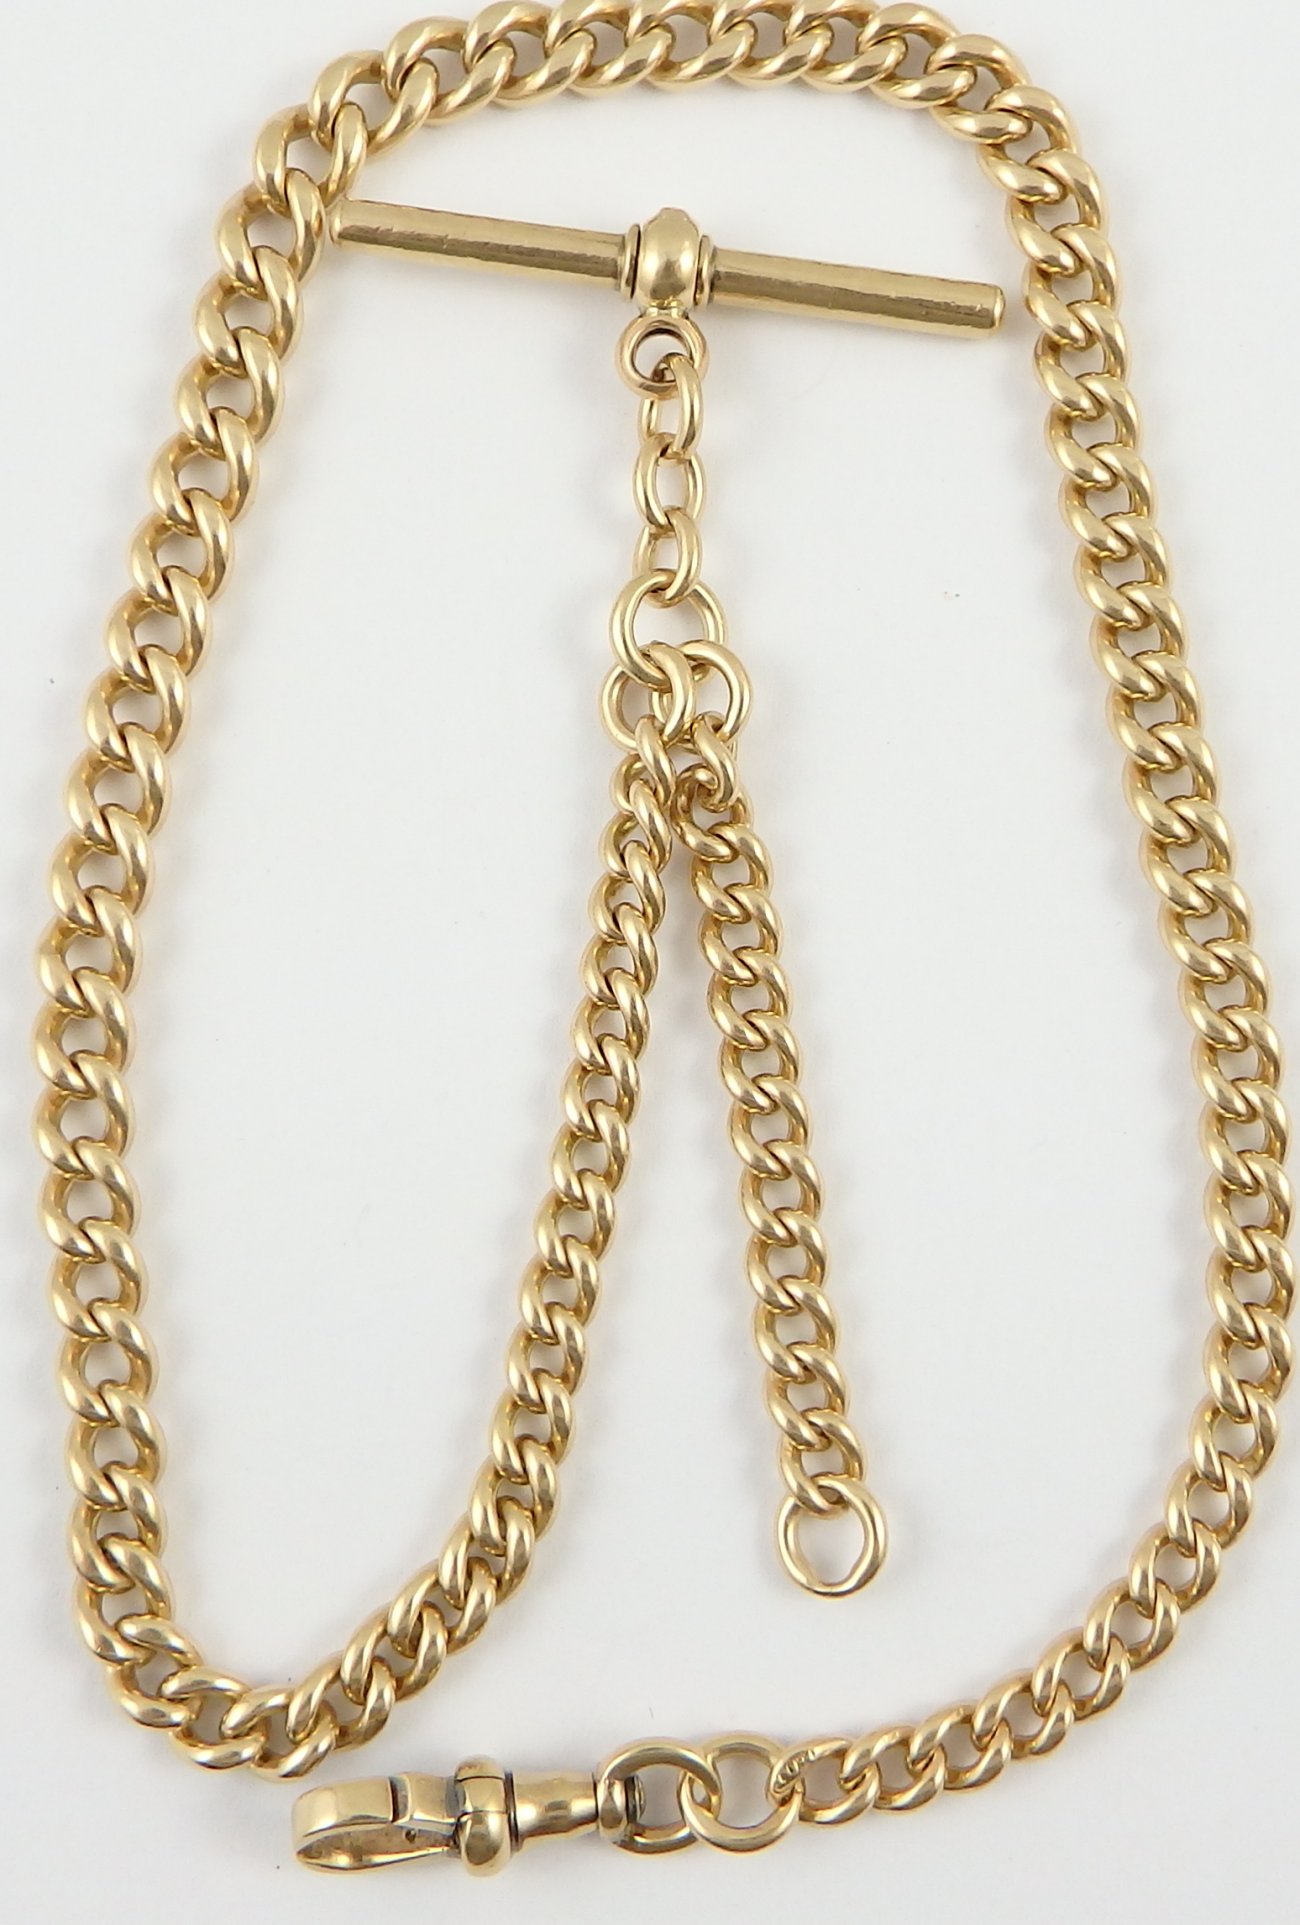 Heavy 15 inch antique 10ct solid yellow gold albert watch guard chain ...